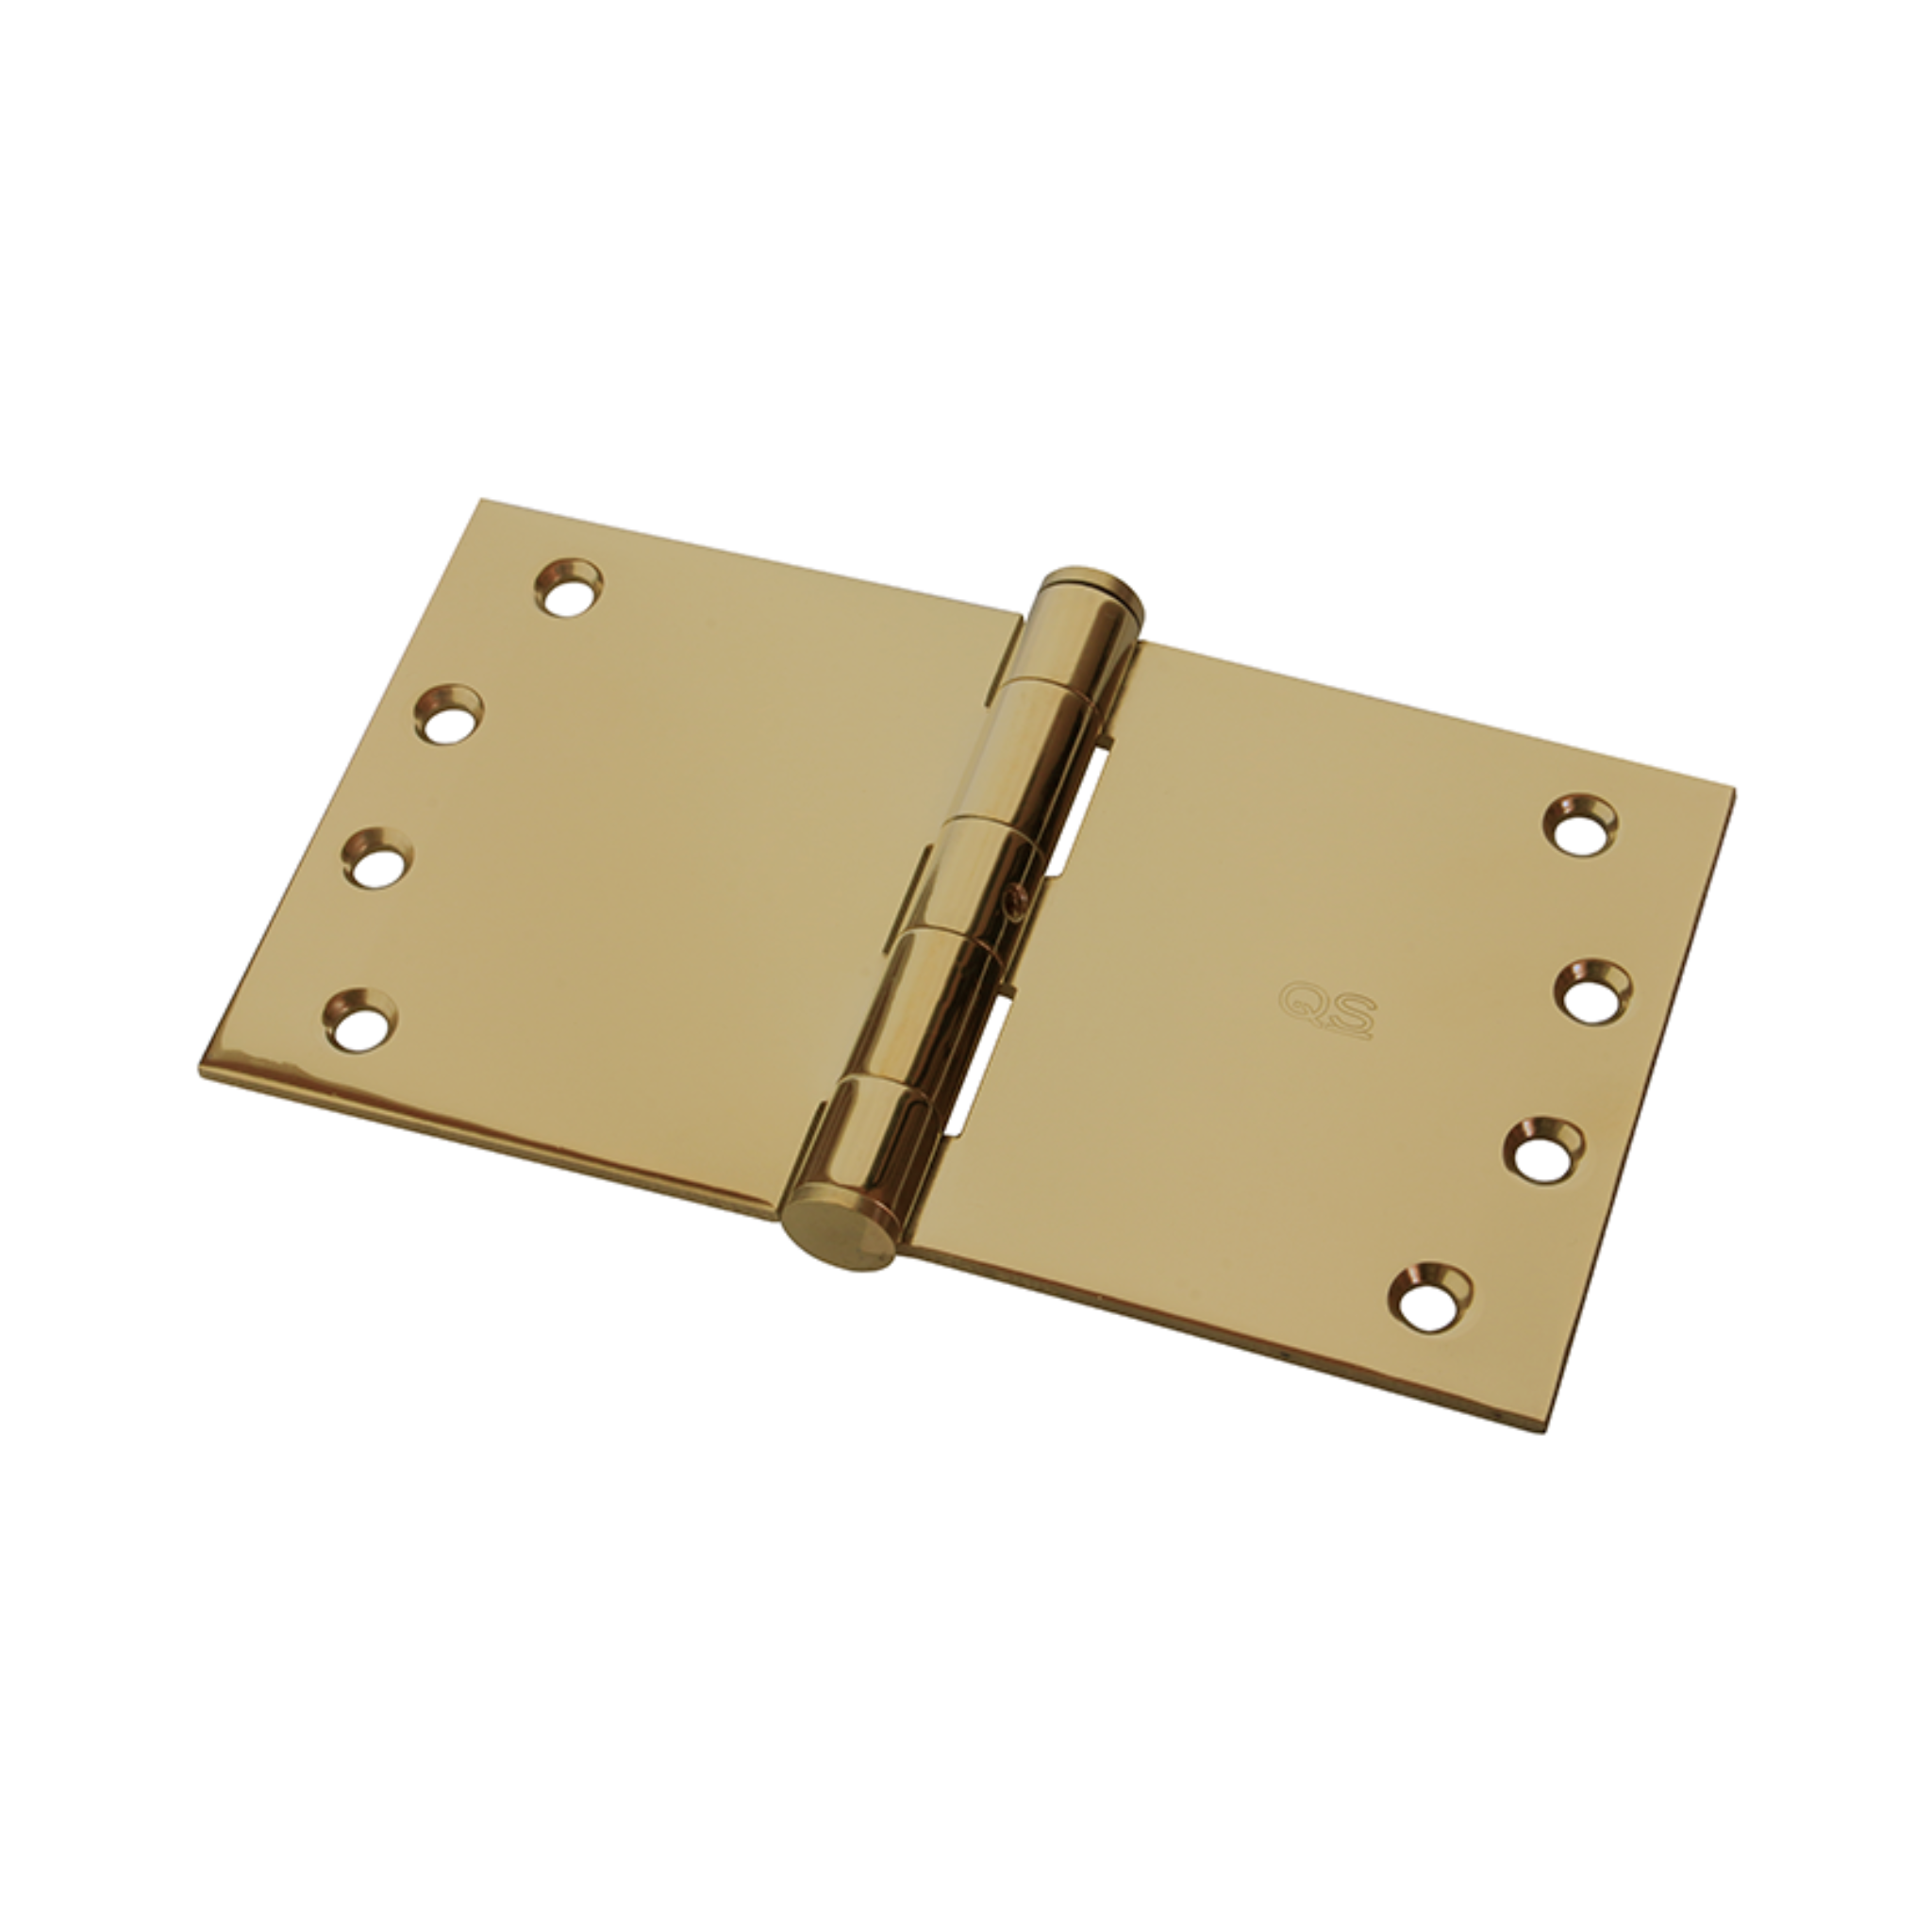 QS4412/3PVD, Projection Hinge, 2 x Hinges (1 Pair), 100mm (h) x 200mm (w) x 3mm (t), PVD Brass, QS